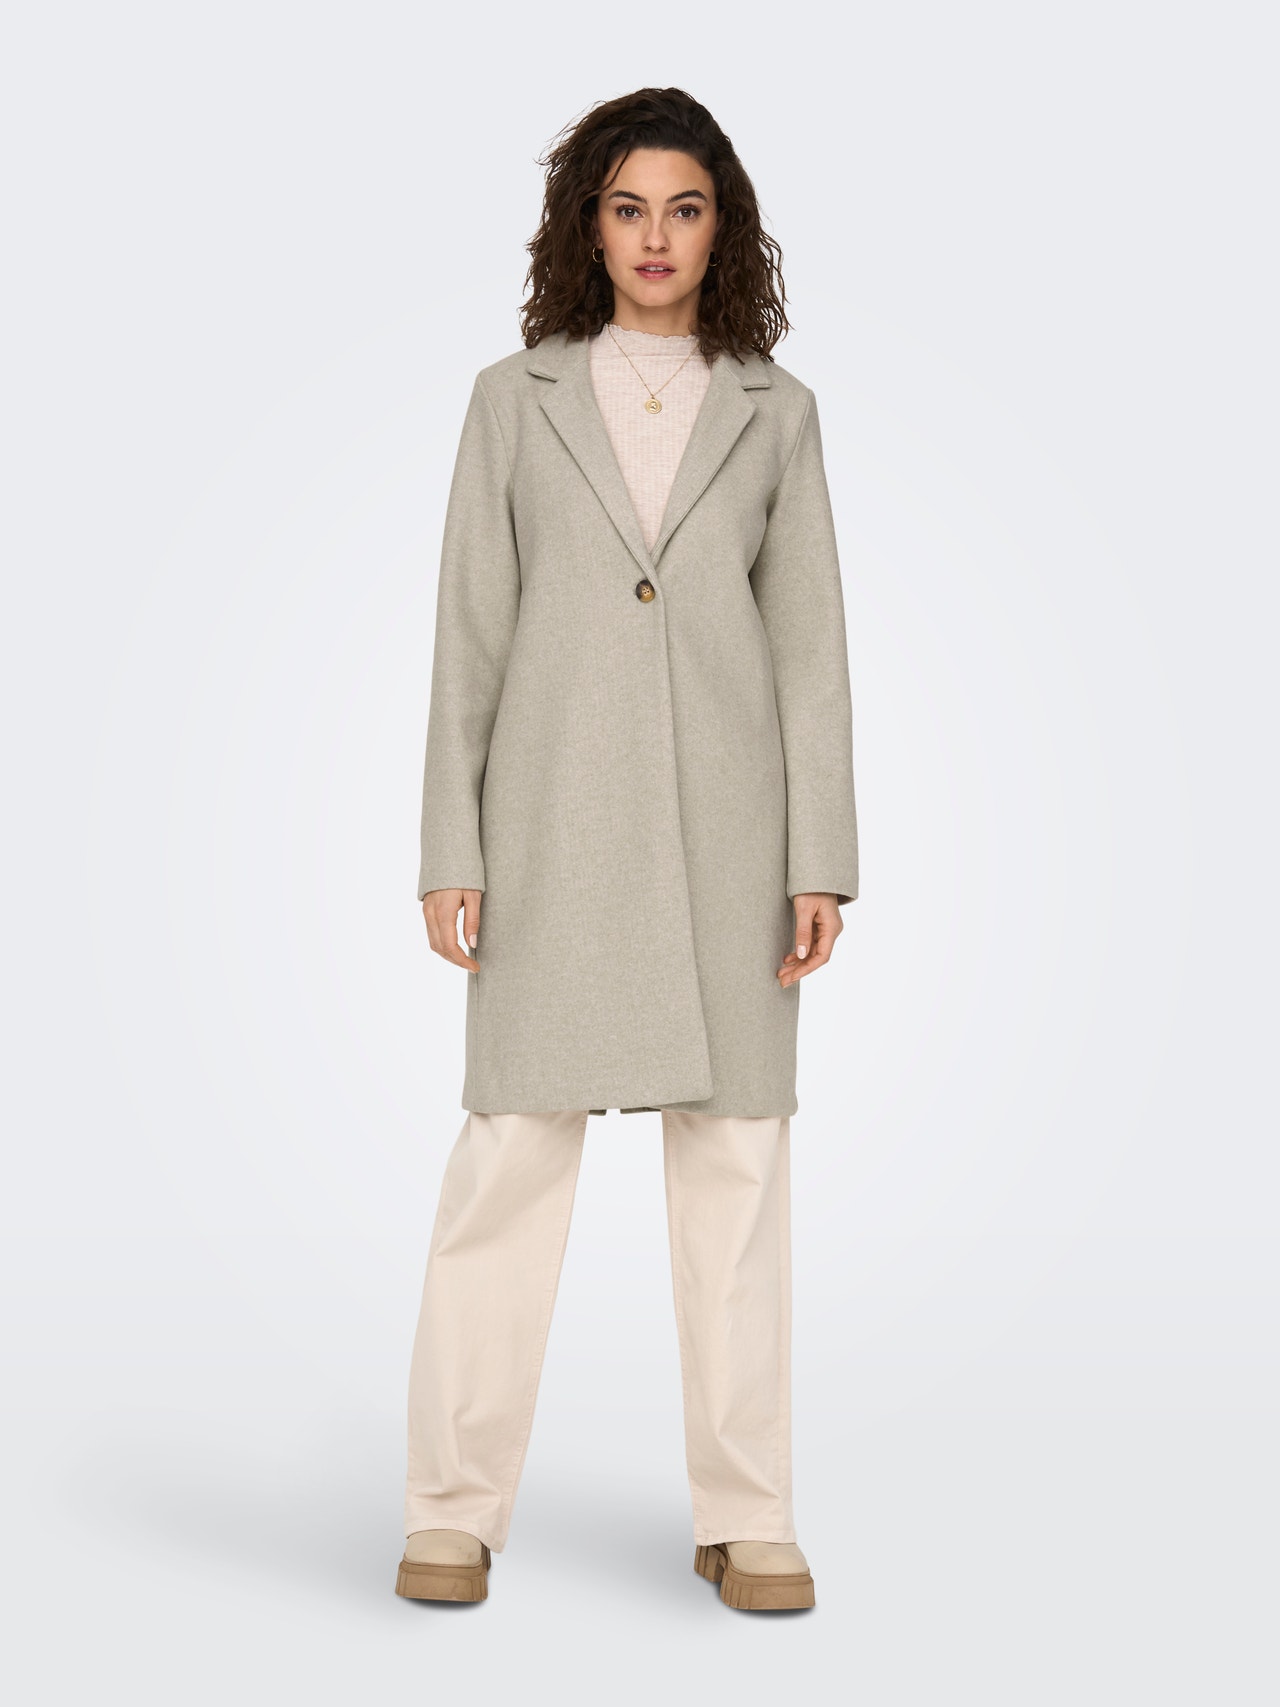 ONLY Solid color coat -Humus - 15281382